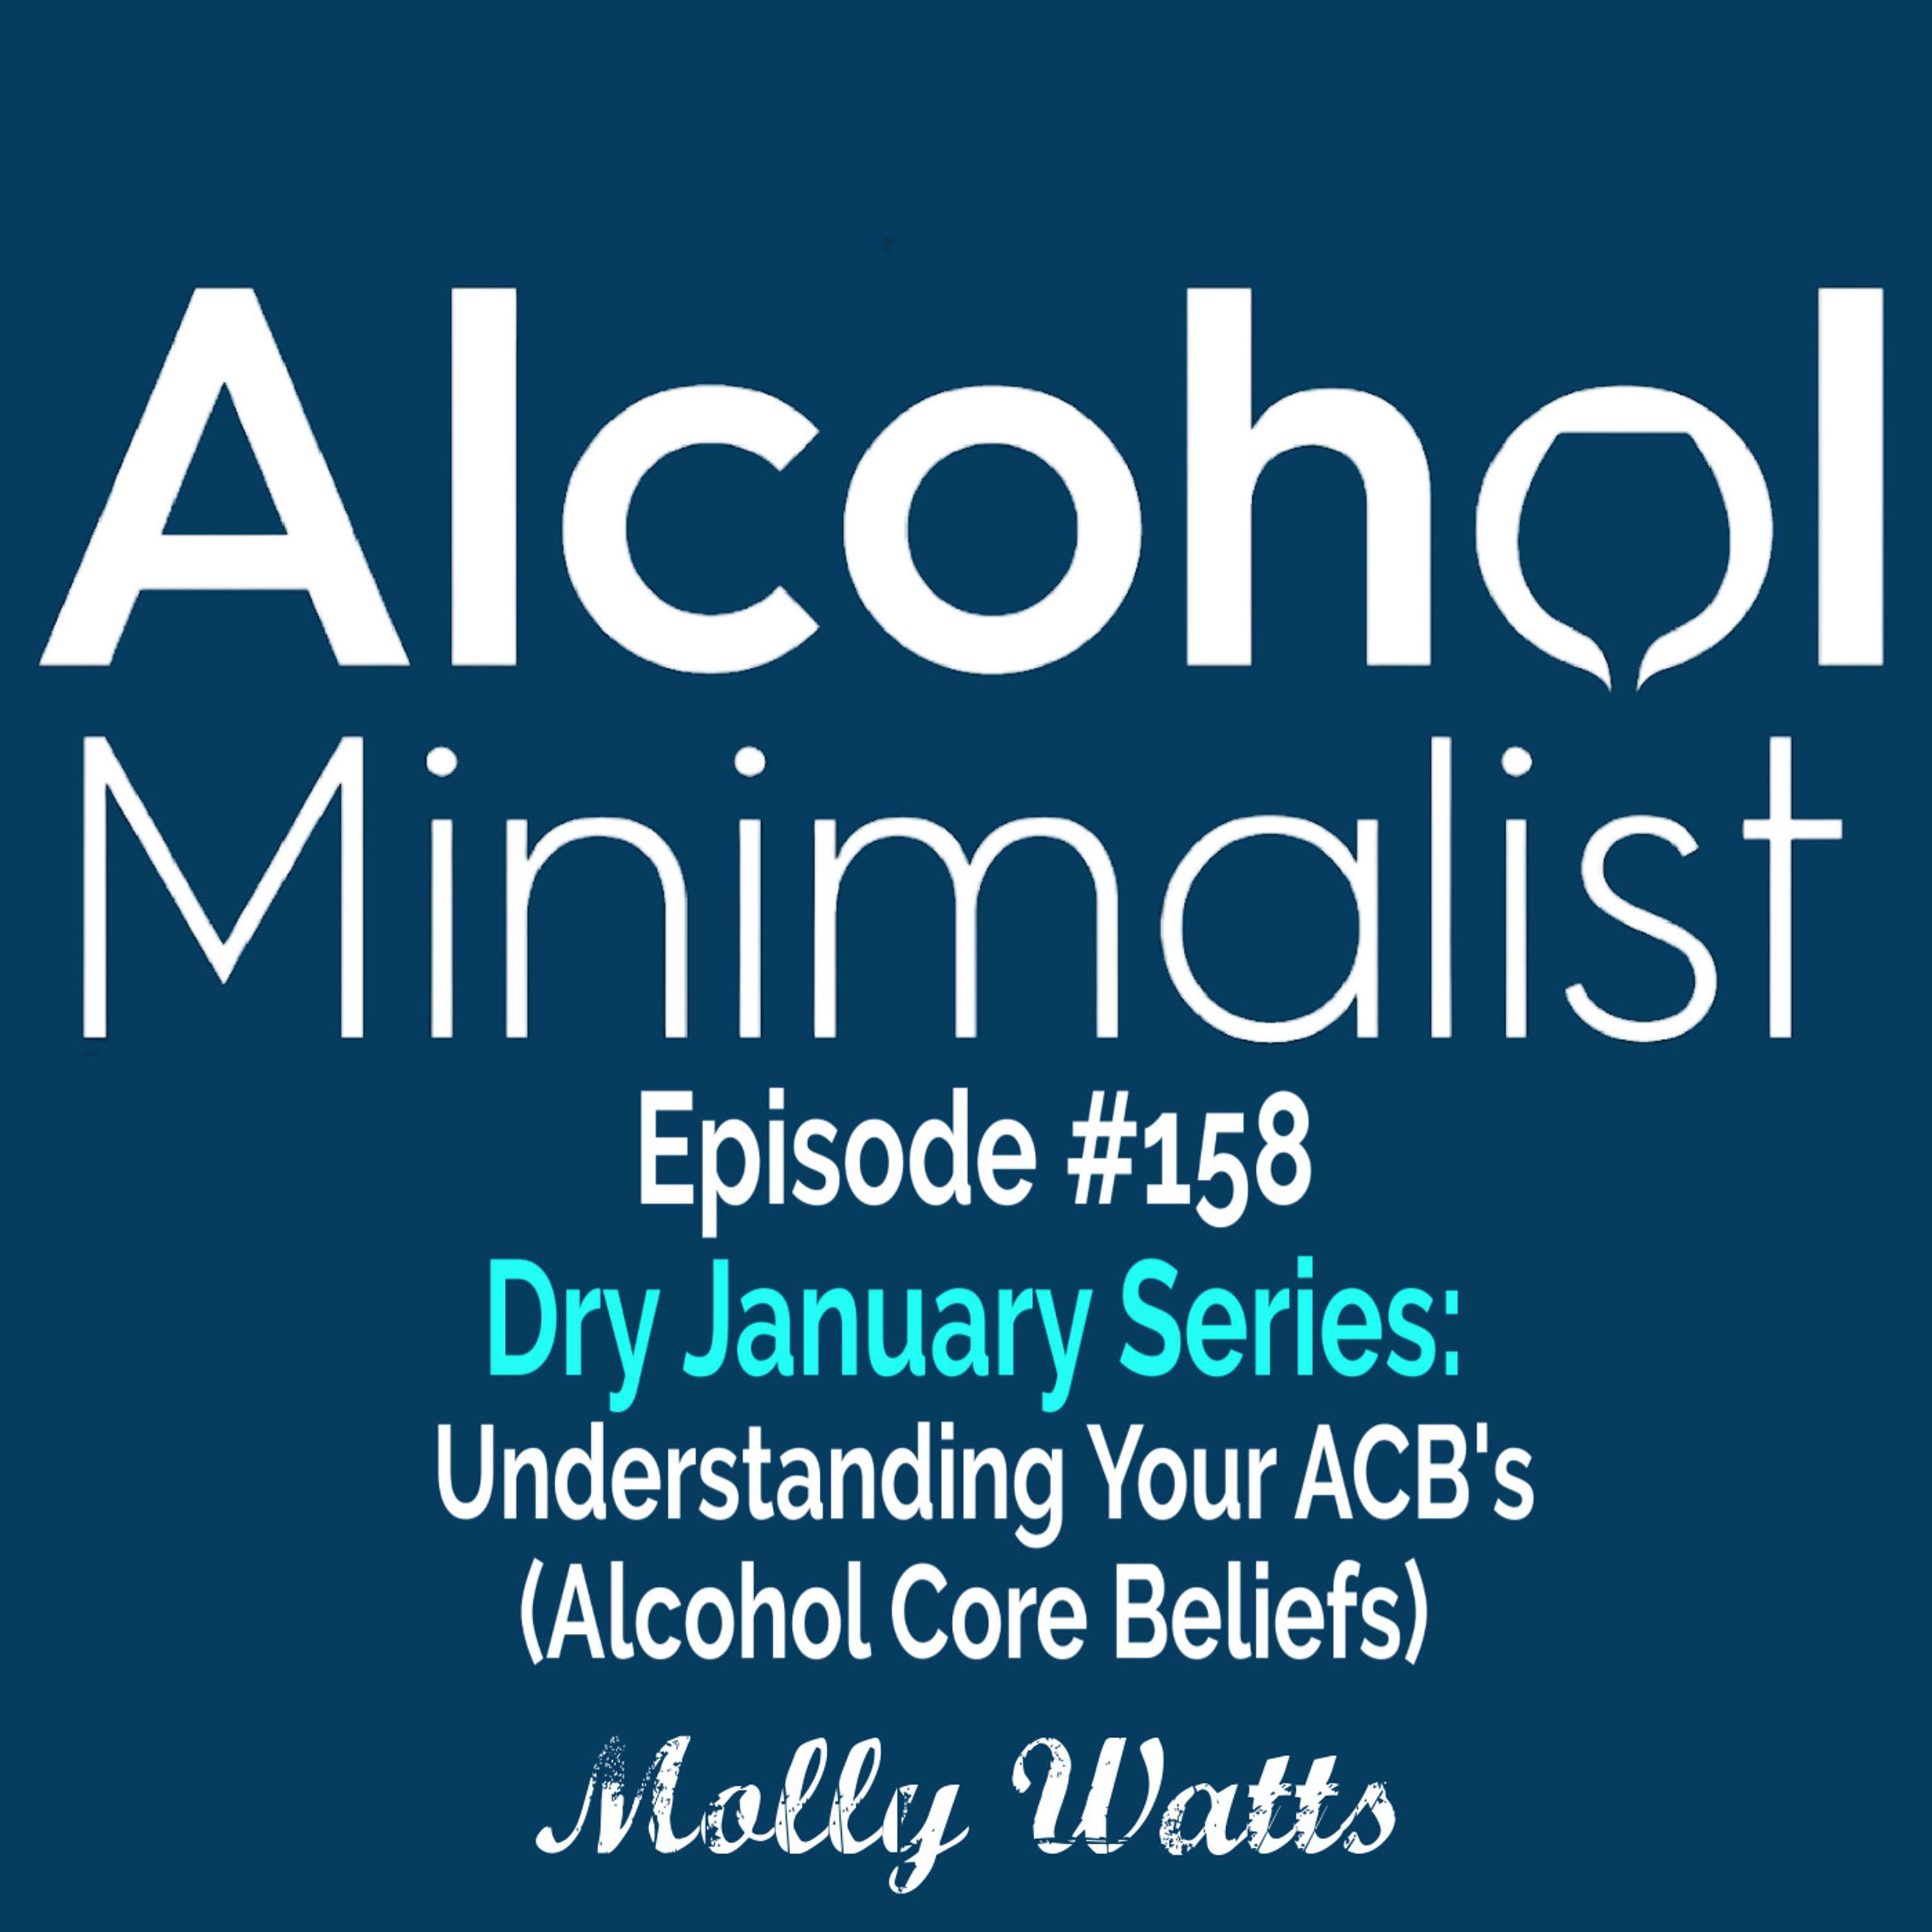 Dry January Series: Understanding Your ACB's (Alcohol Core Beliefs)